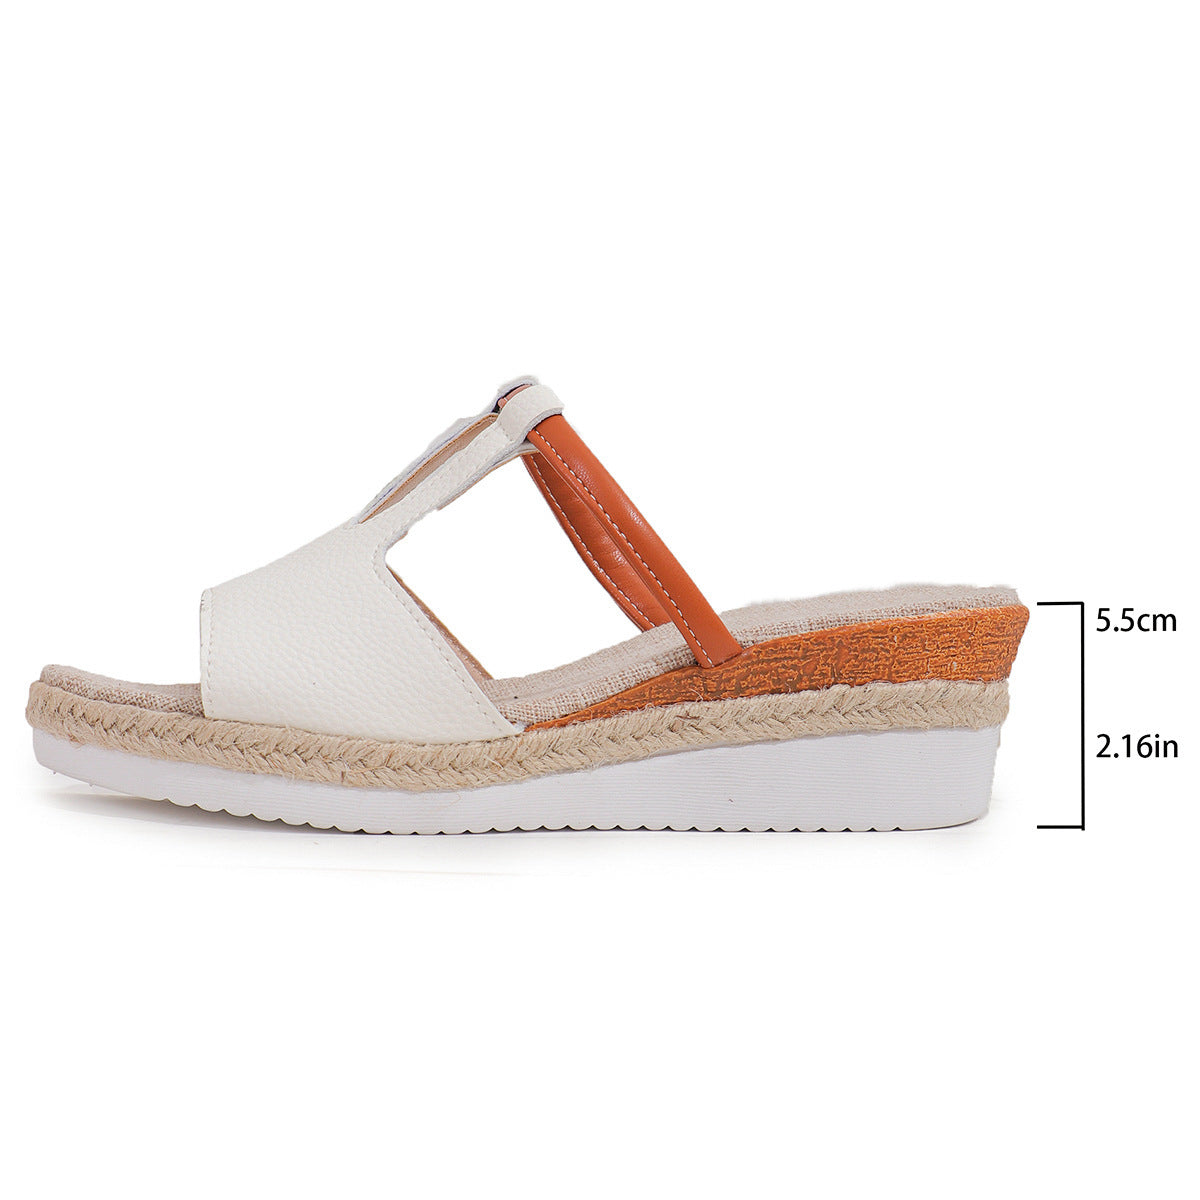 Ethnic Style One Strap Sandals Platform Wedge Buckle Plus Size Shoes & Bags